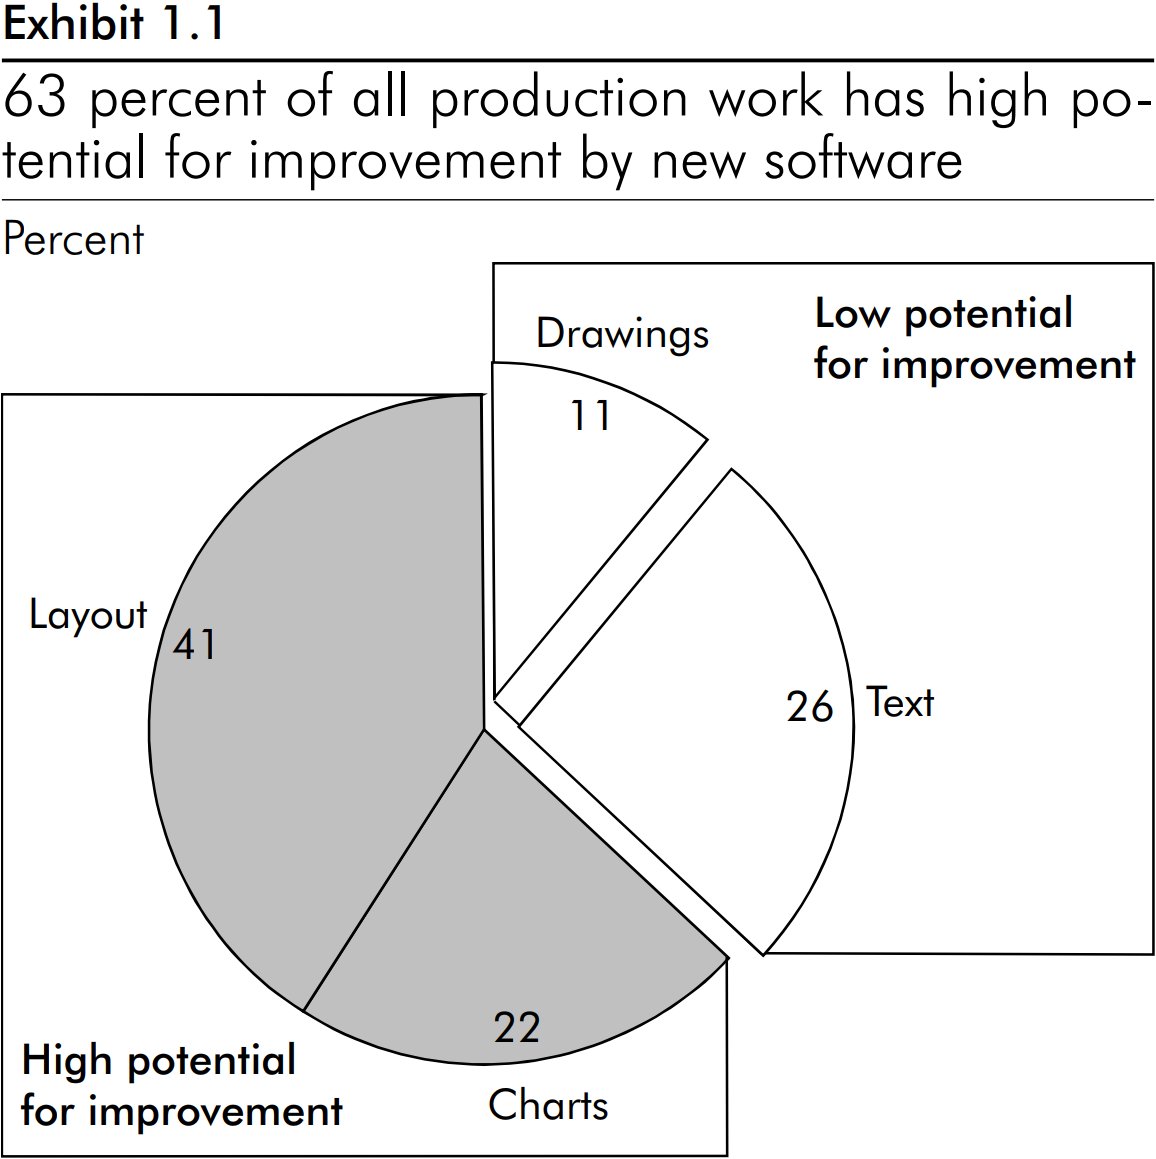 Pie chart showing 63% of slide production work has high potential for improvement by software.